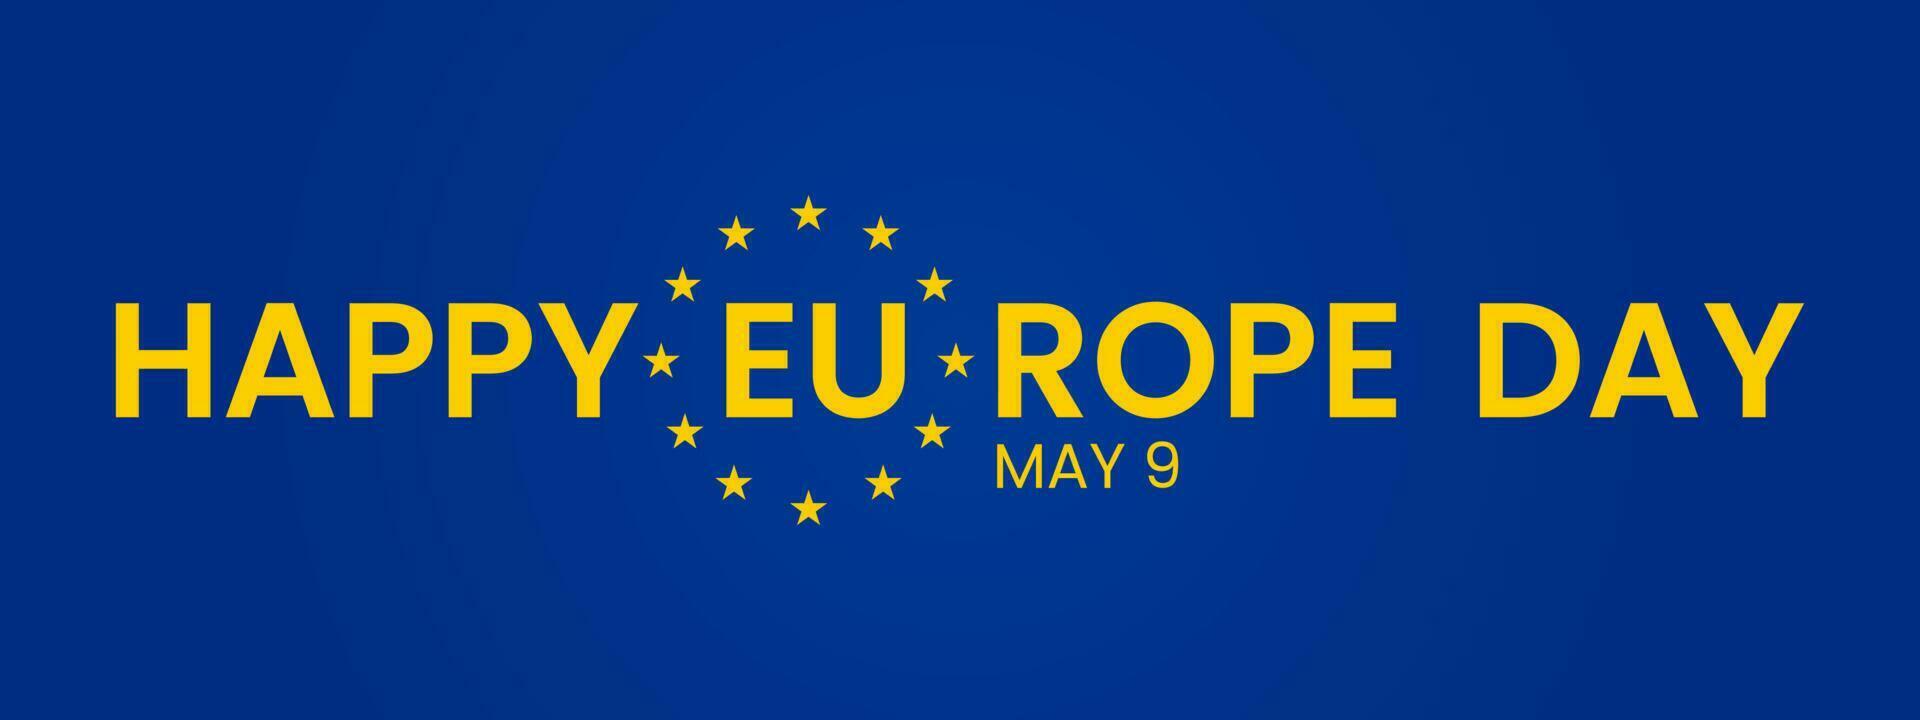 Happy Europe Day of European Union. May 9. Blue flag, yellow stars, diverse people holding hands together, different cultural equality, vector illustration.